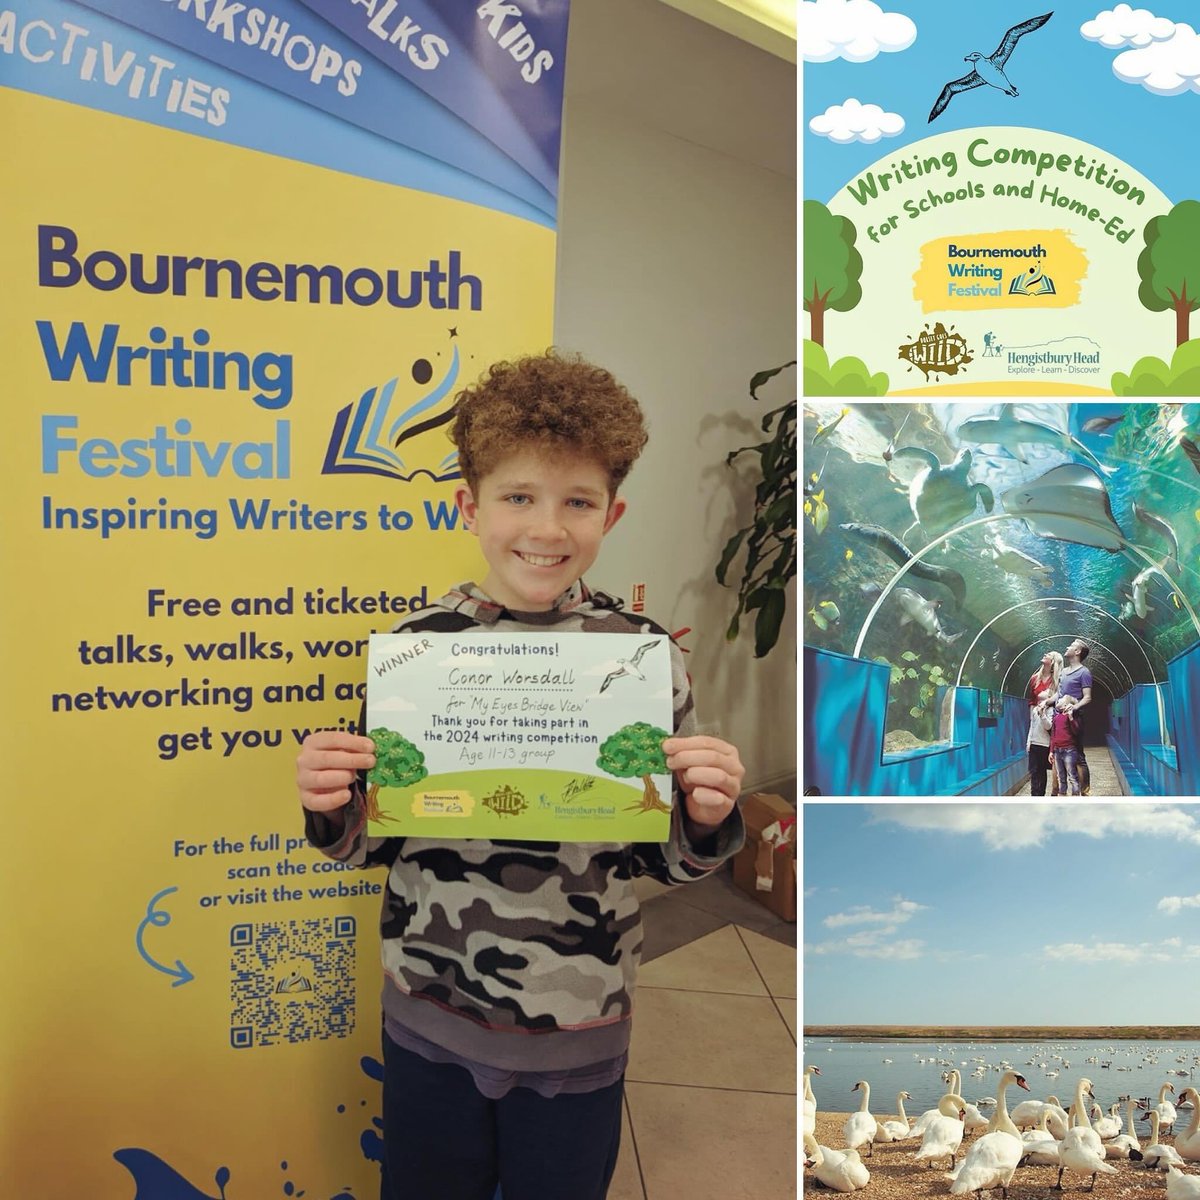 Huge congratulations to Connor, who won the children’s writing competition! We teamed up with Dorset Goes WILD and Hengistbury Head Writers’ Group for a nature-themed writing competition with fantastic prizes including tickets to the B’mouth Oceanarium and Abbotsbury Swannery.